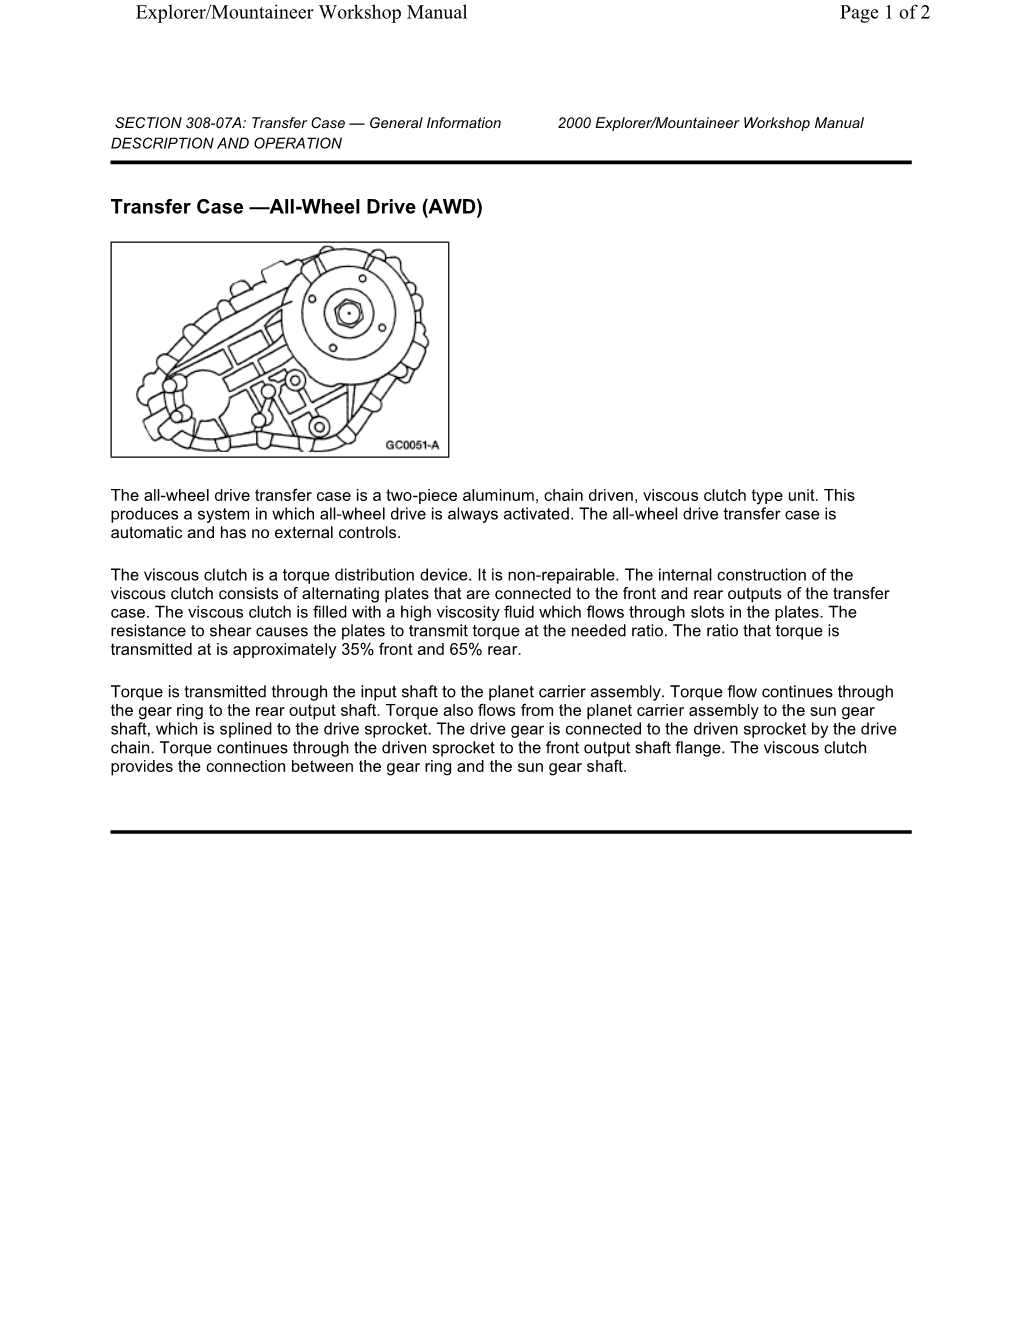 Transfer Case —All-Wheel Drive (AWD) Page 1 of 2 2000 Explorer